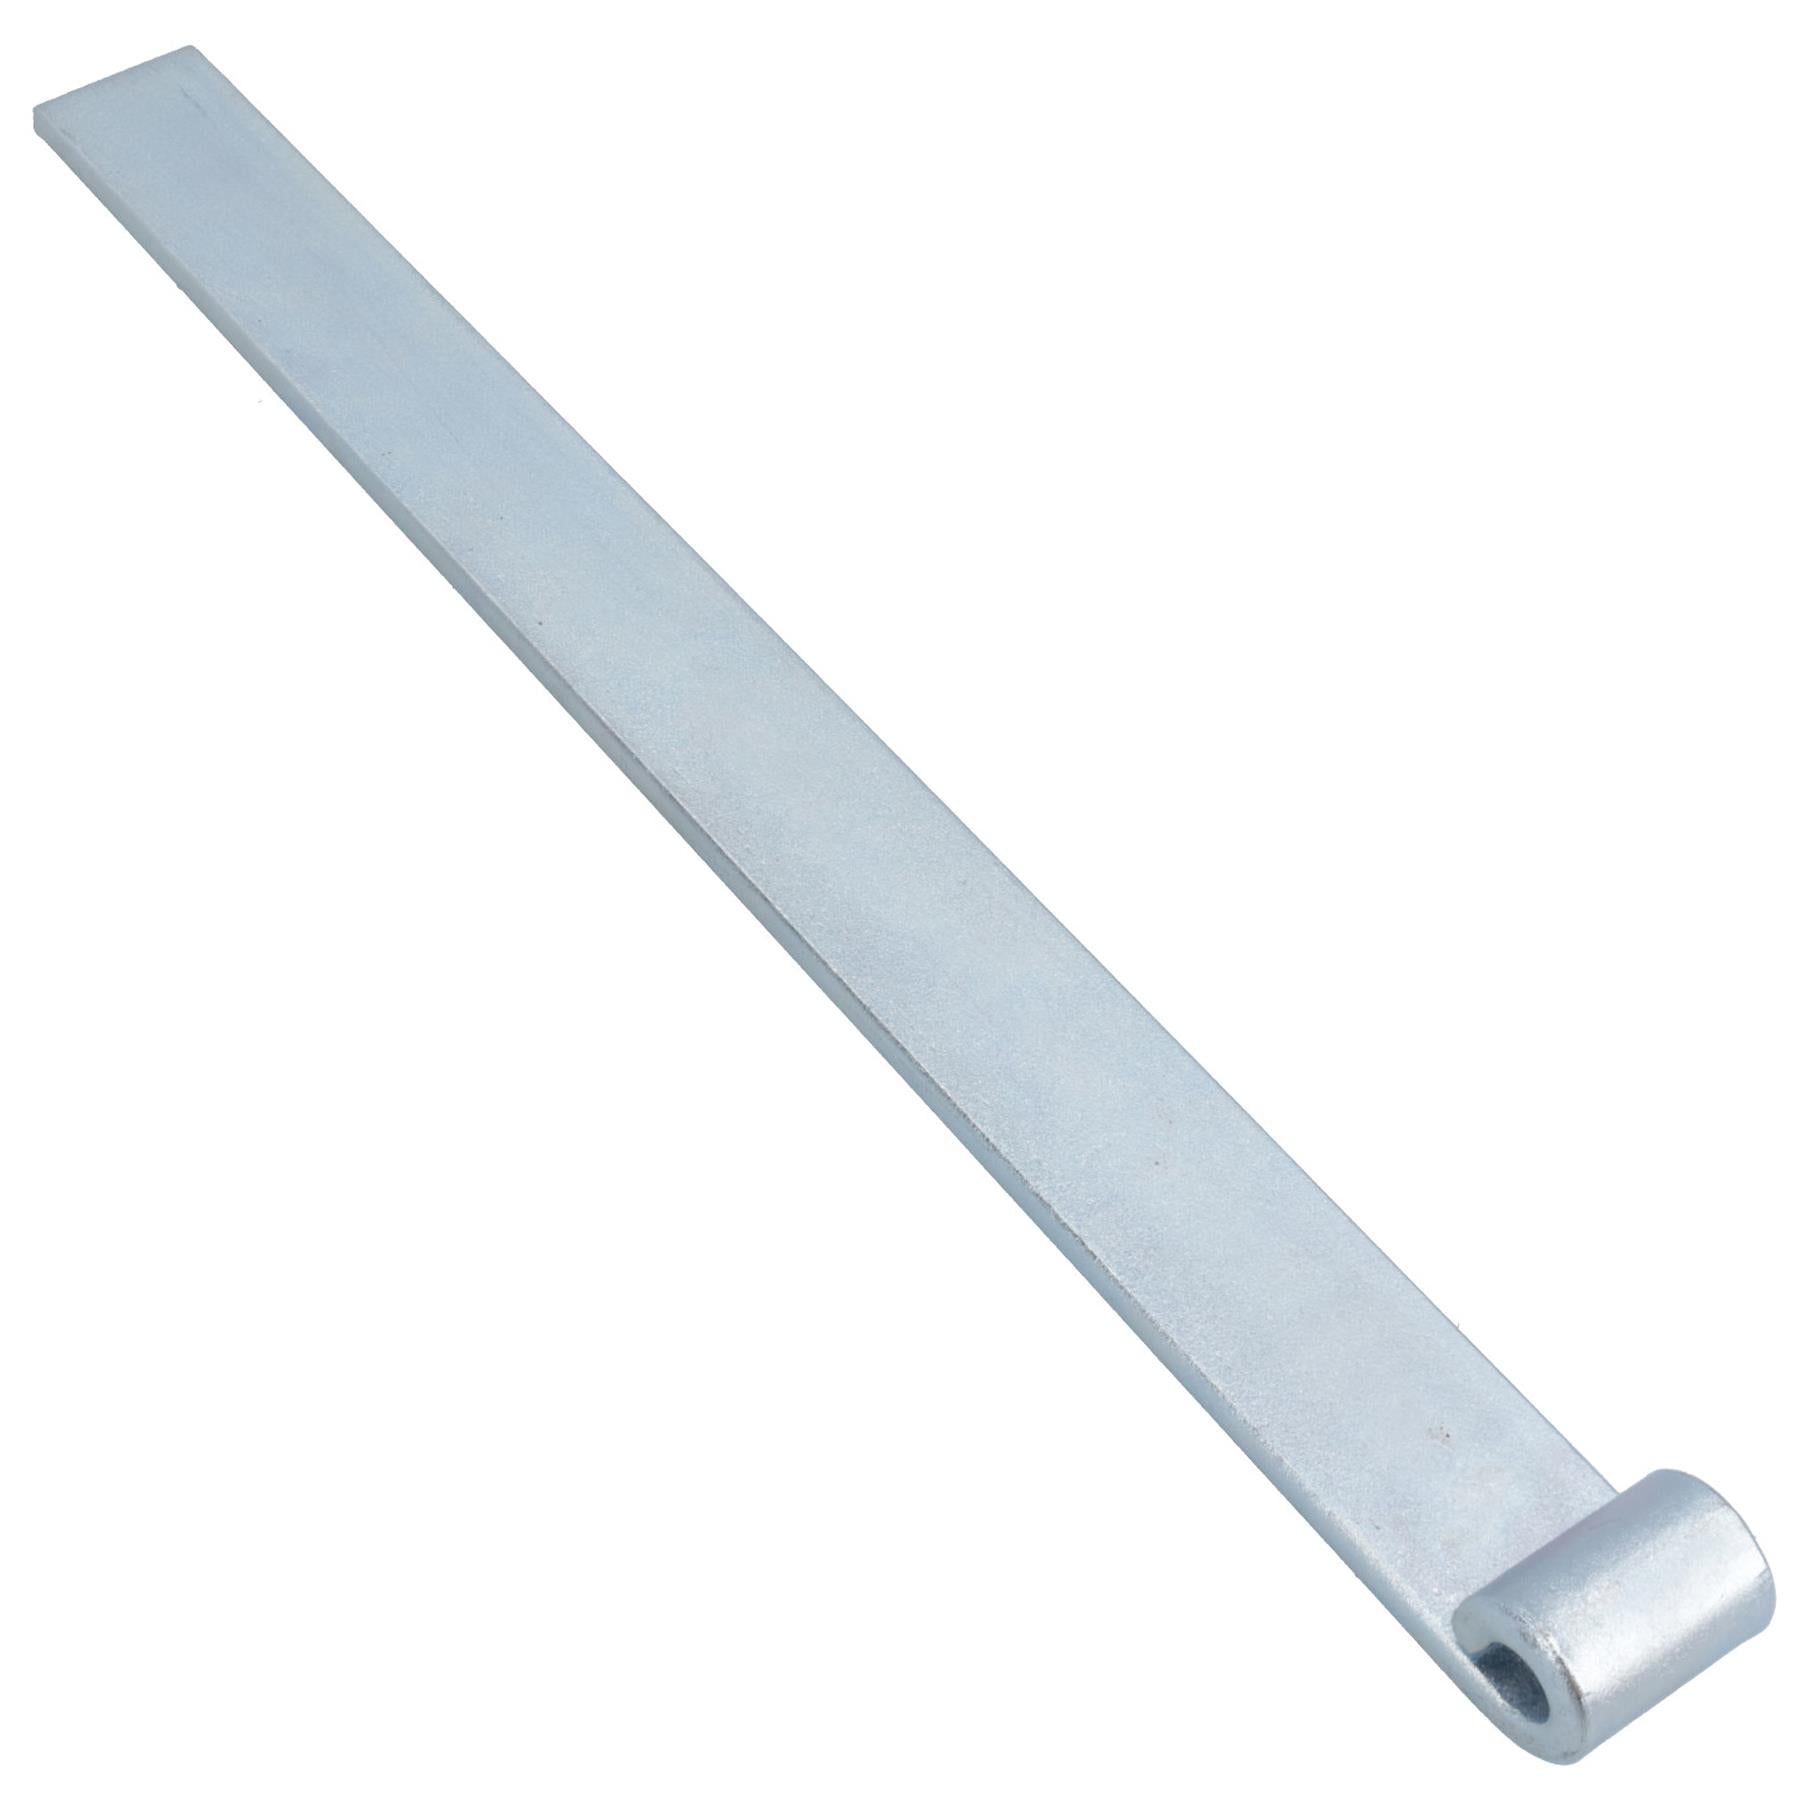 HD Strap Tailgate Straight Hinge for 12mm Pins 460mm Long Zinc Plated